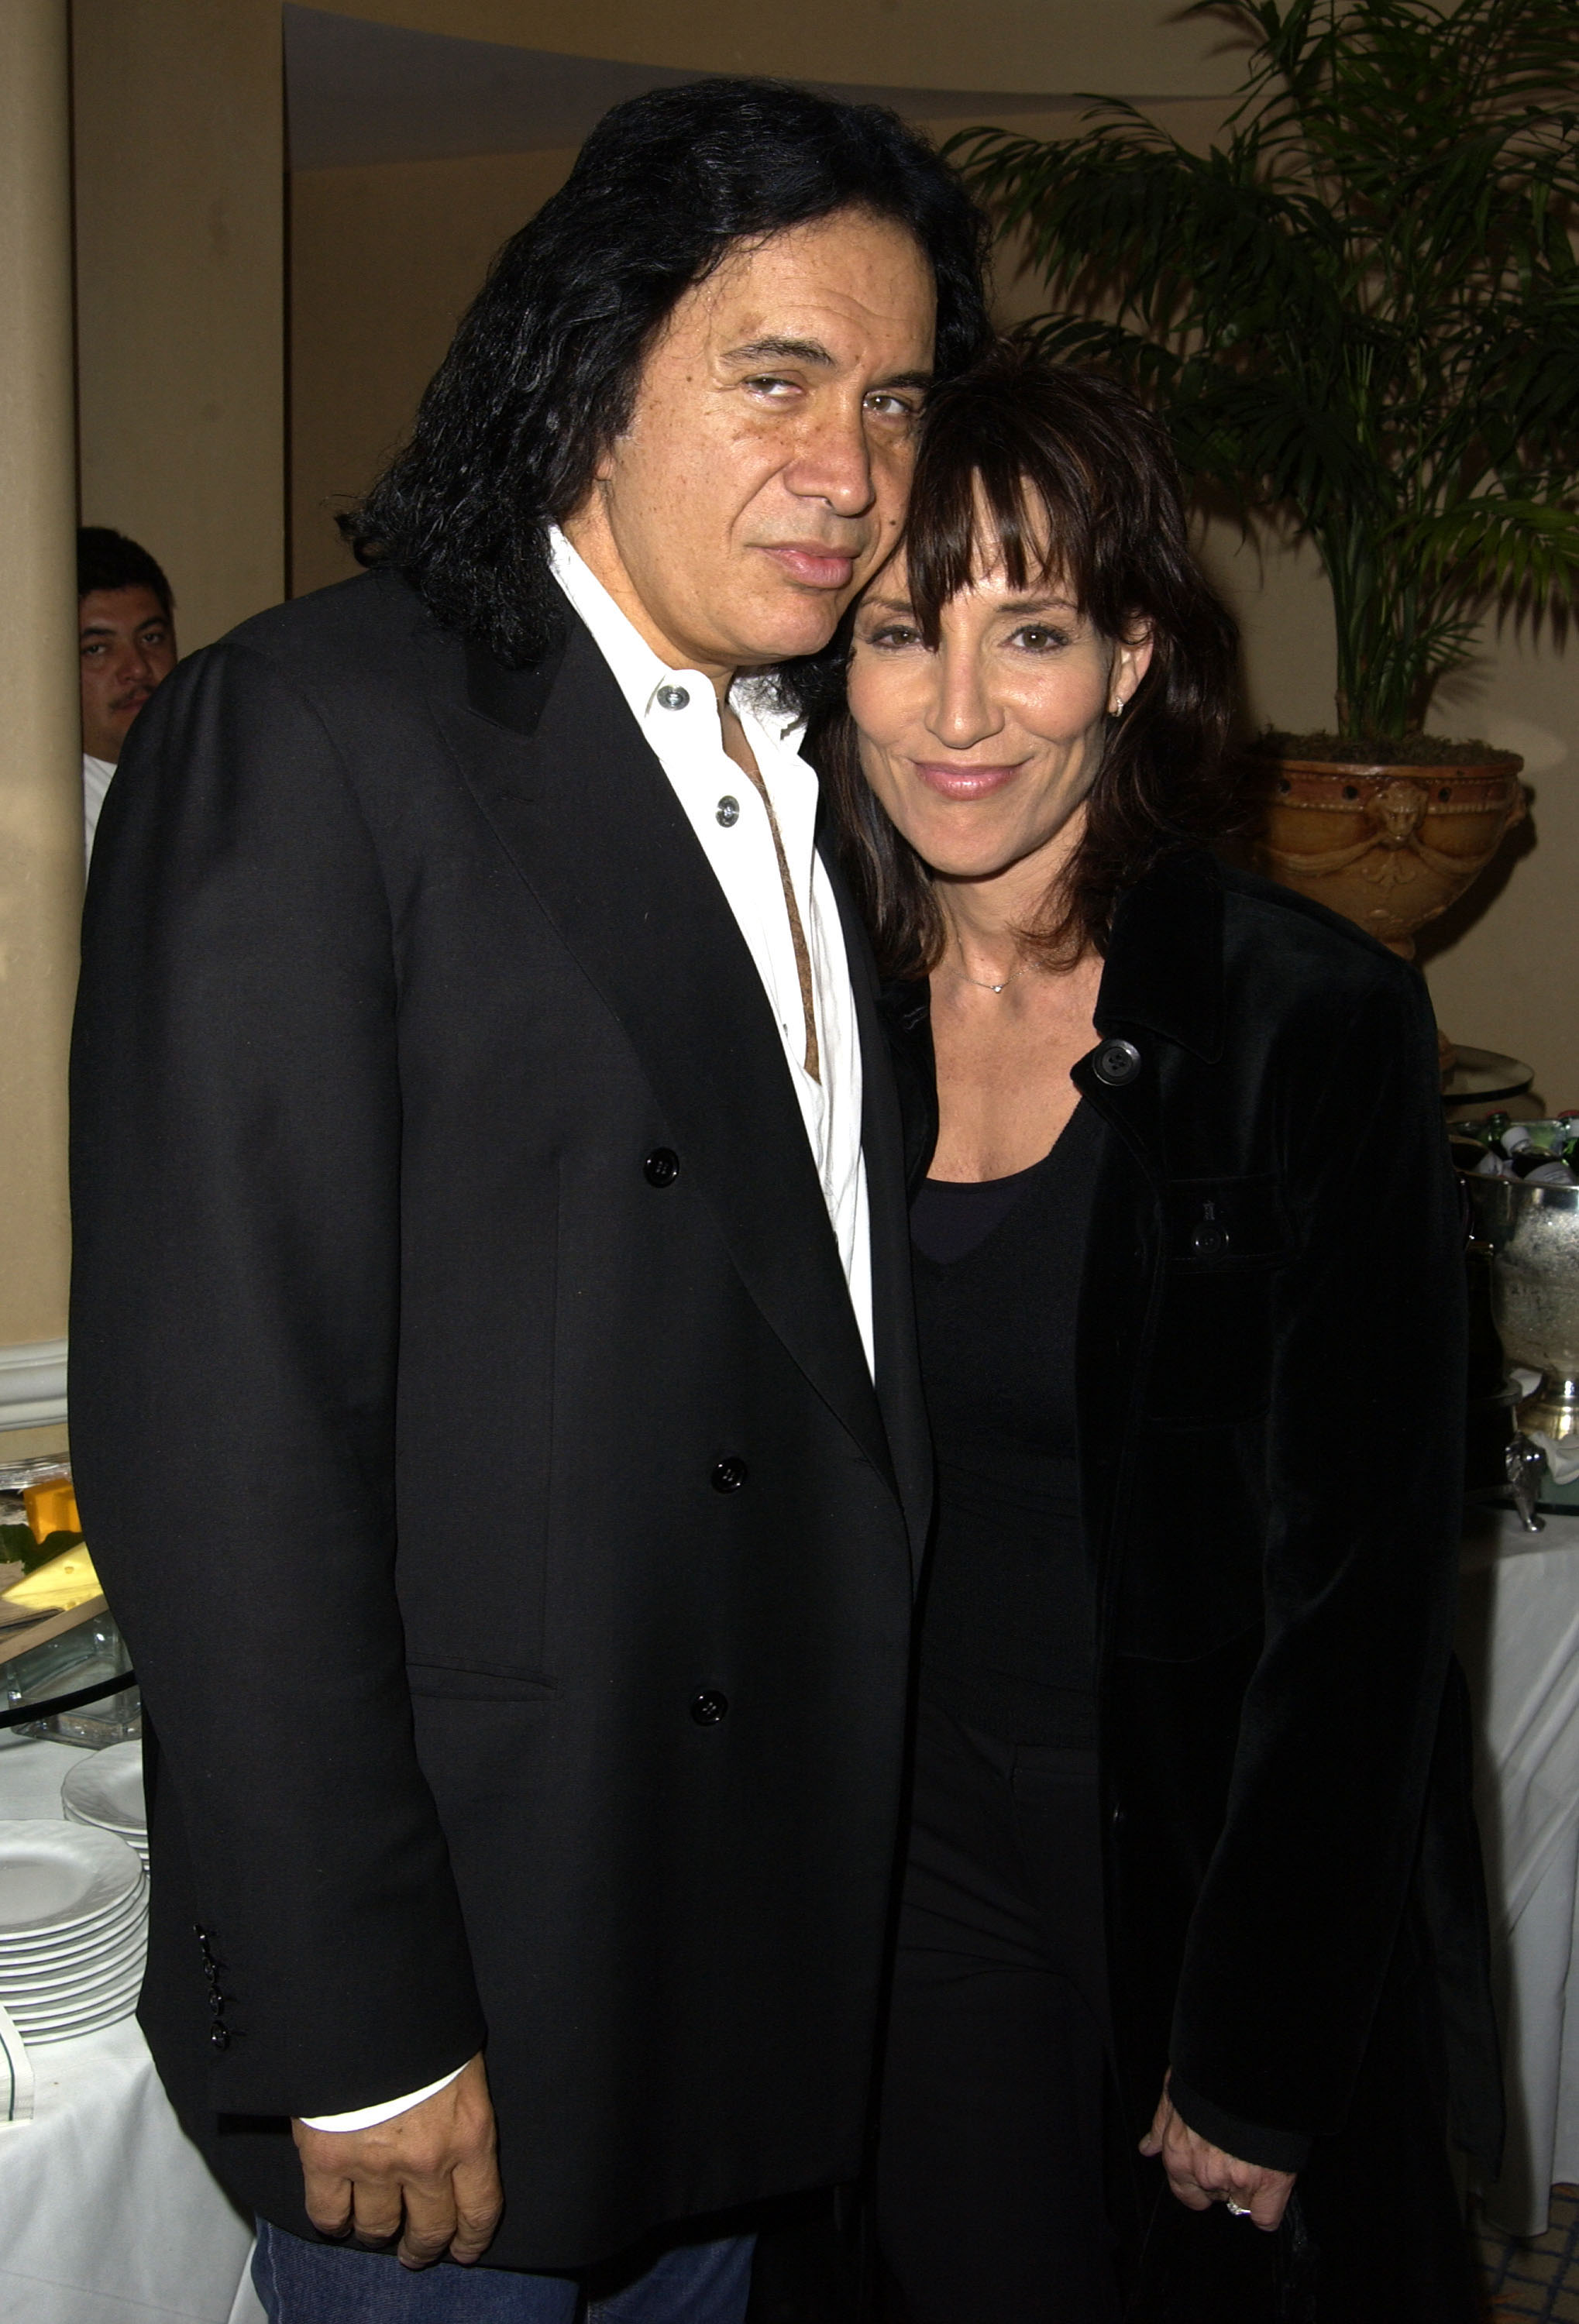 Gene Simmons and Katey Sagal at the 4th Annual MAP Awards Musician's Assistance Program Fundraiser and Benefit Performance on November 5, 2003, in Beverly Hills, California. | Source: Getty Images